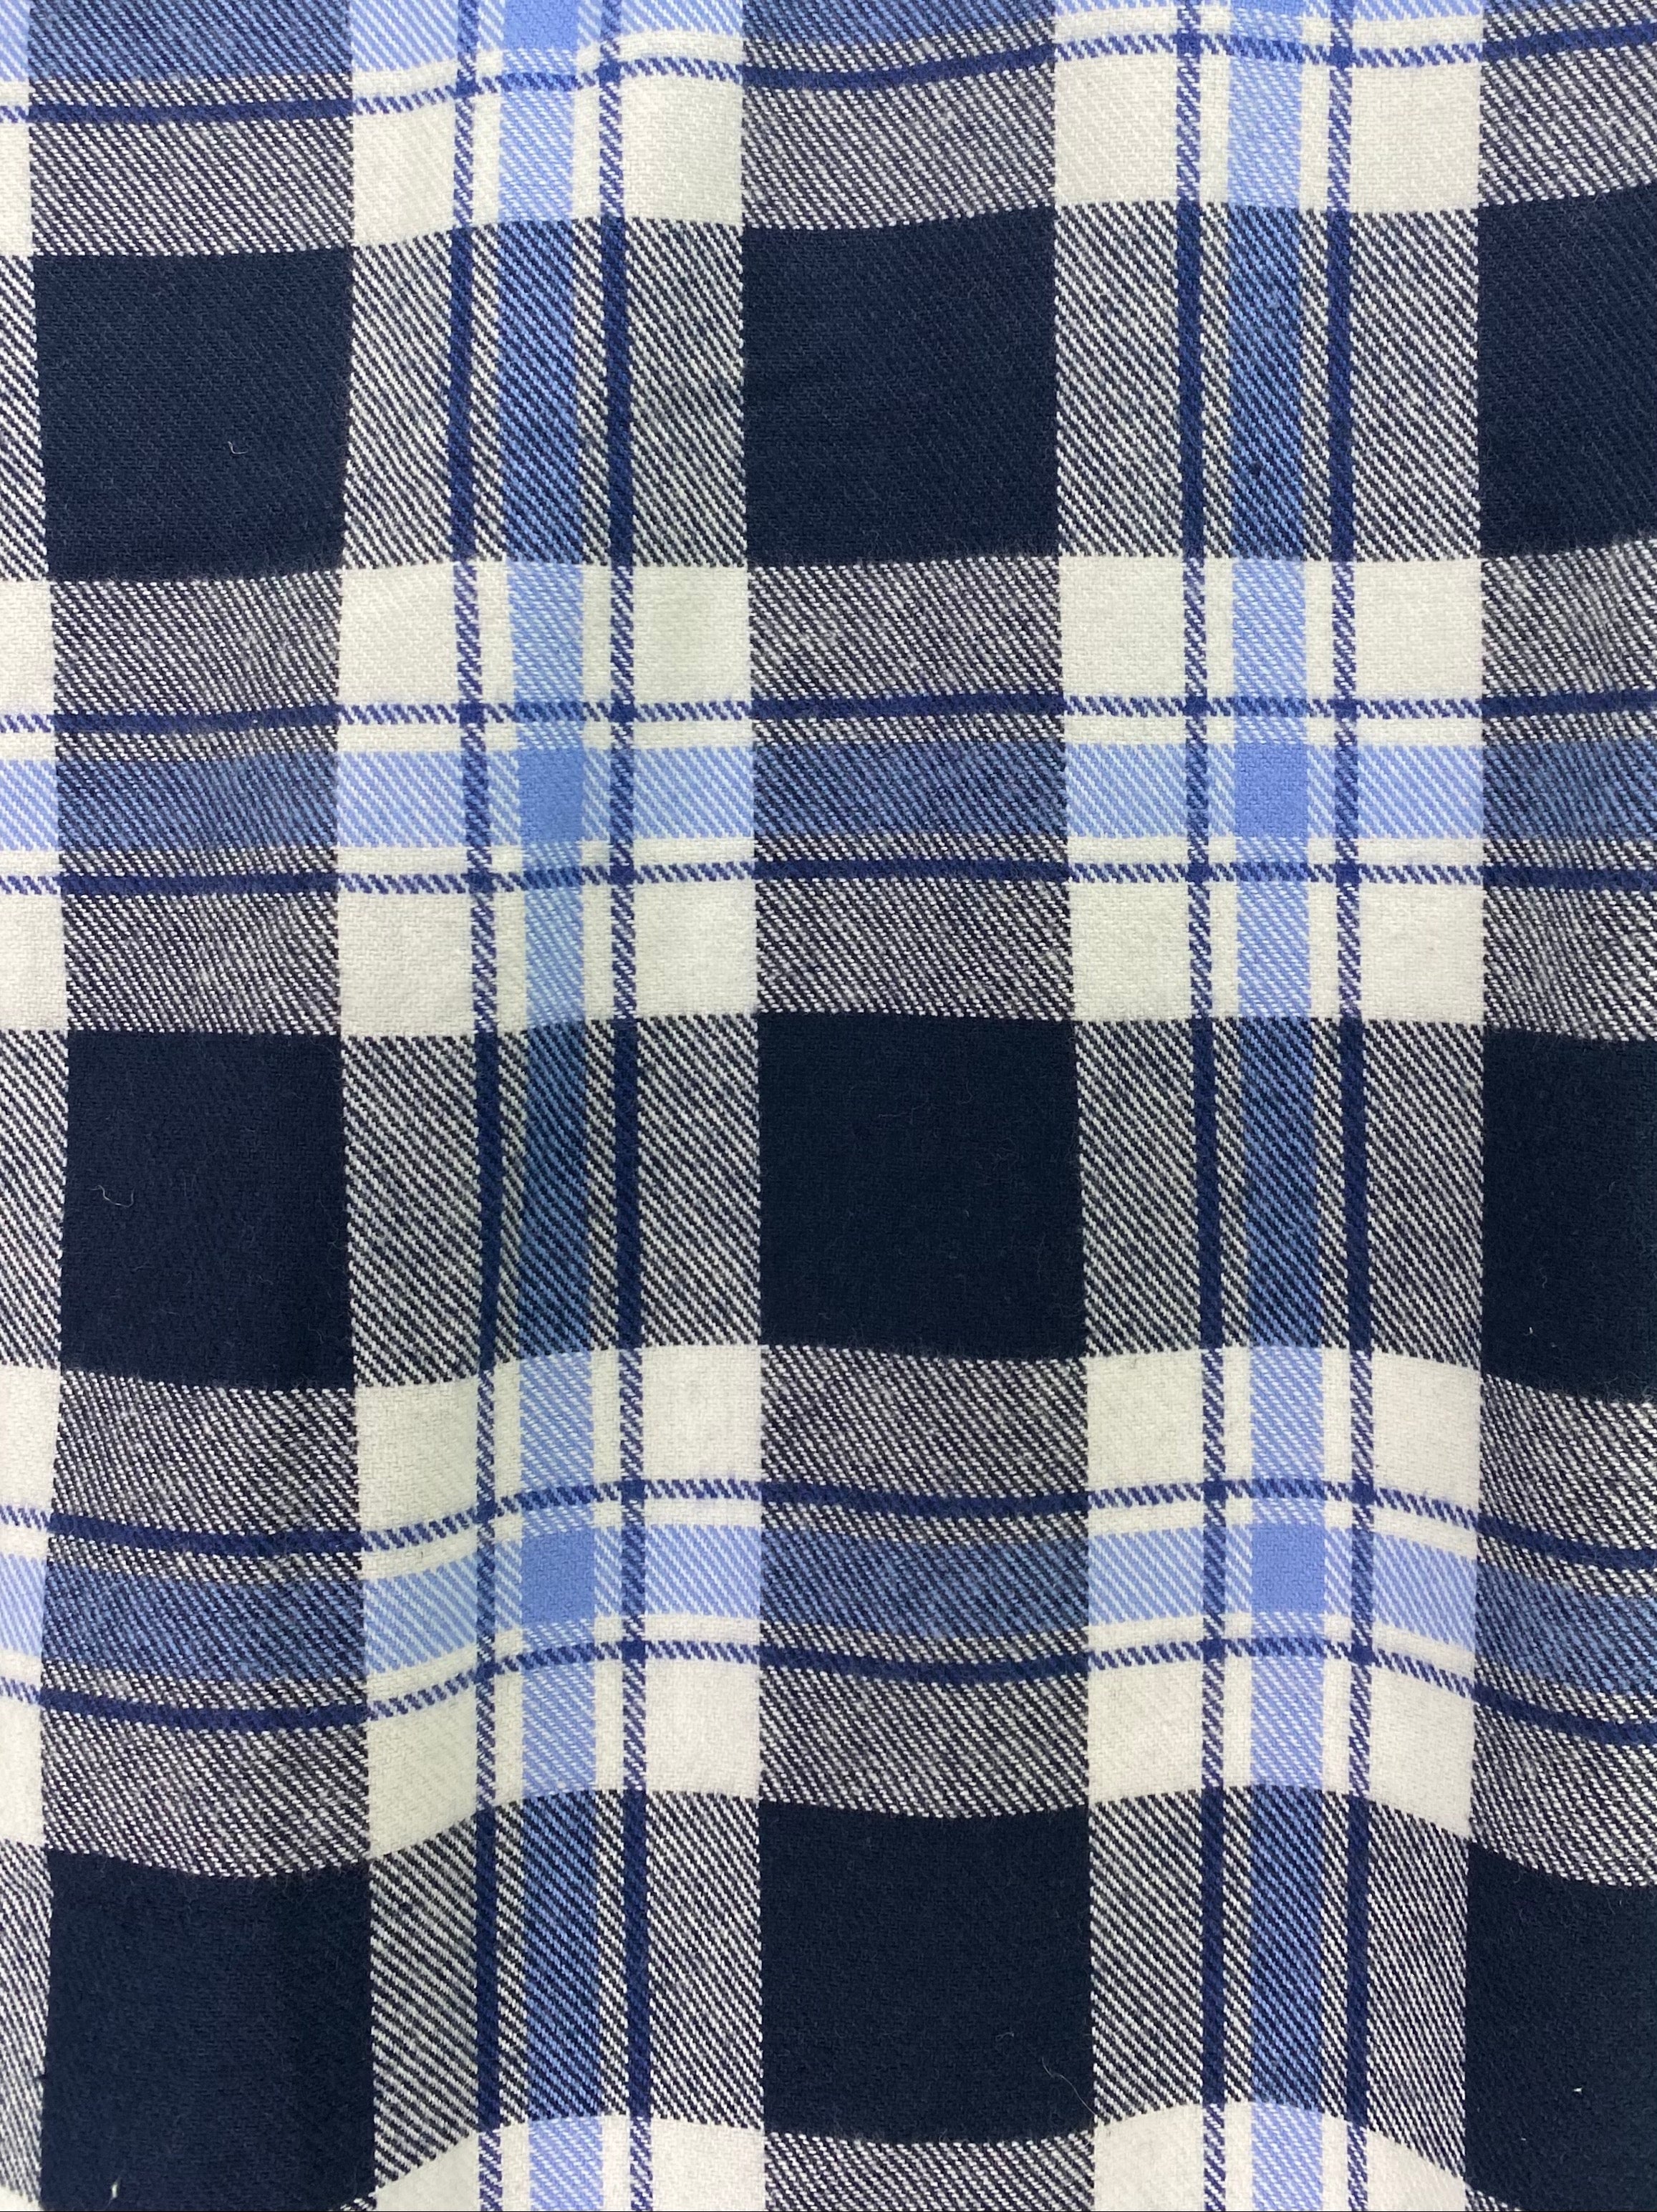 Navy Blue, Light French Blue, and White Flannel Plaid Infinity or Blanket Scarf